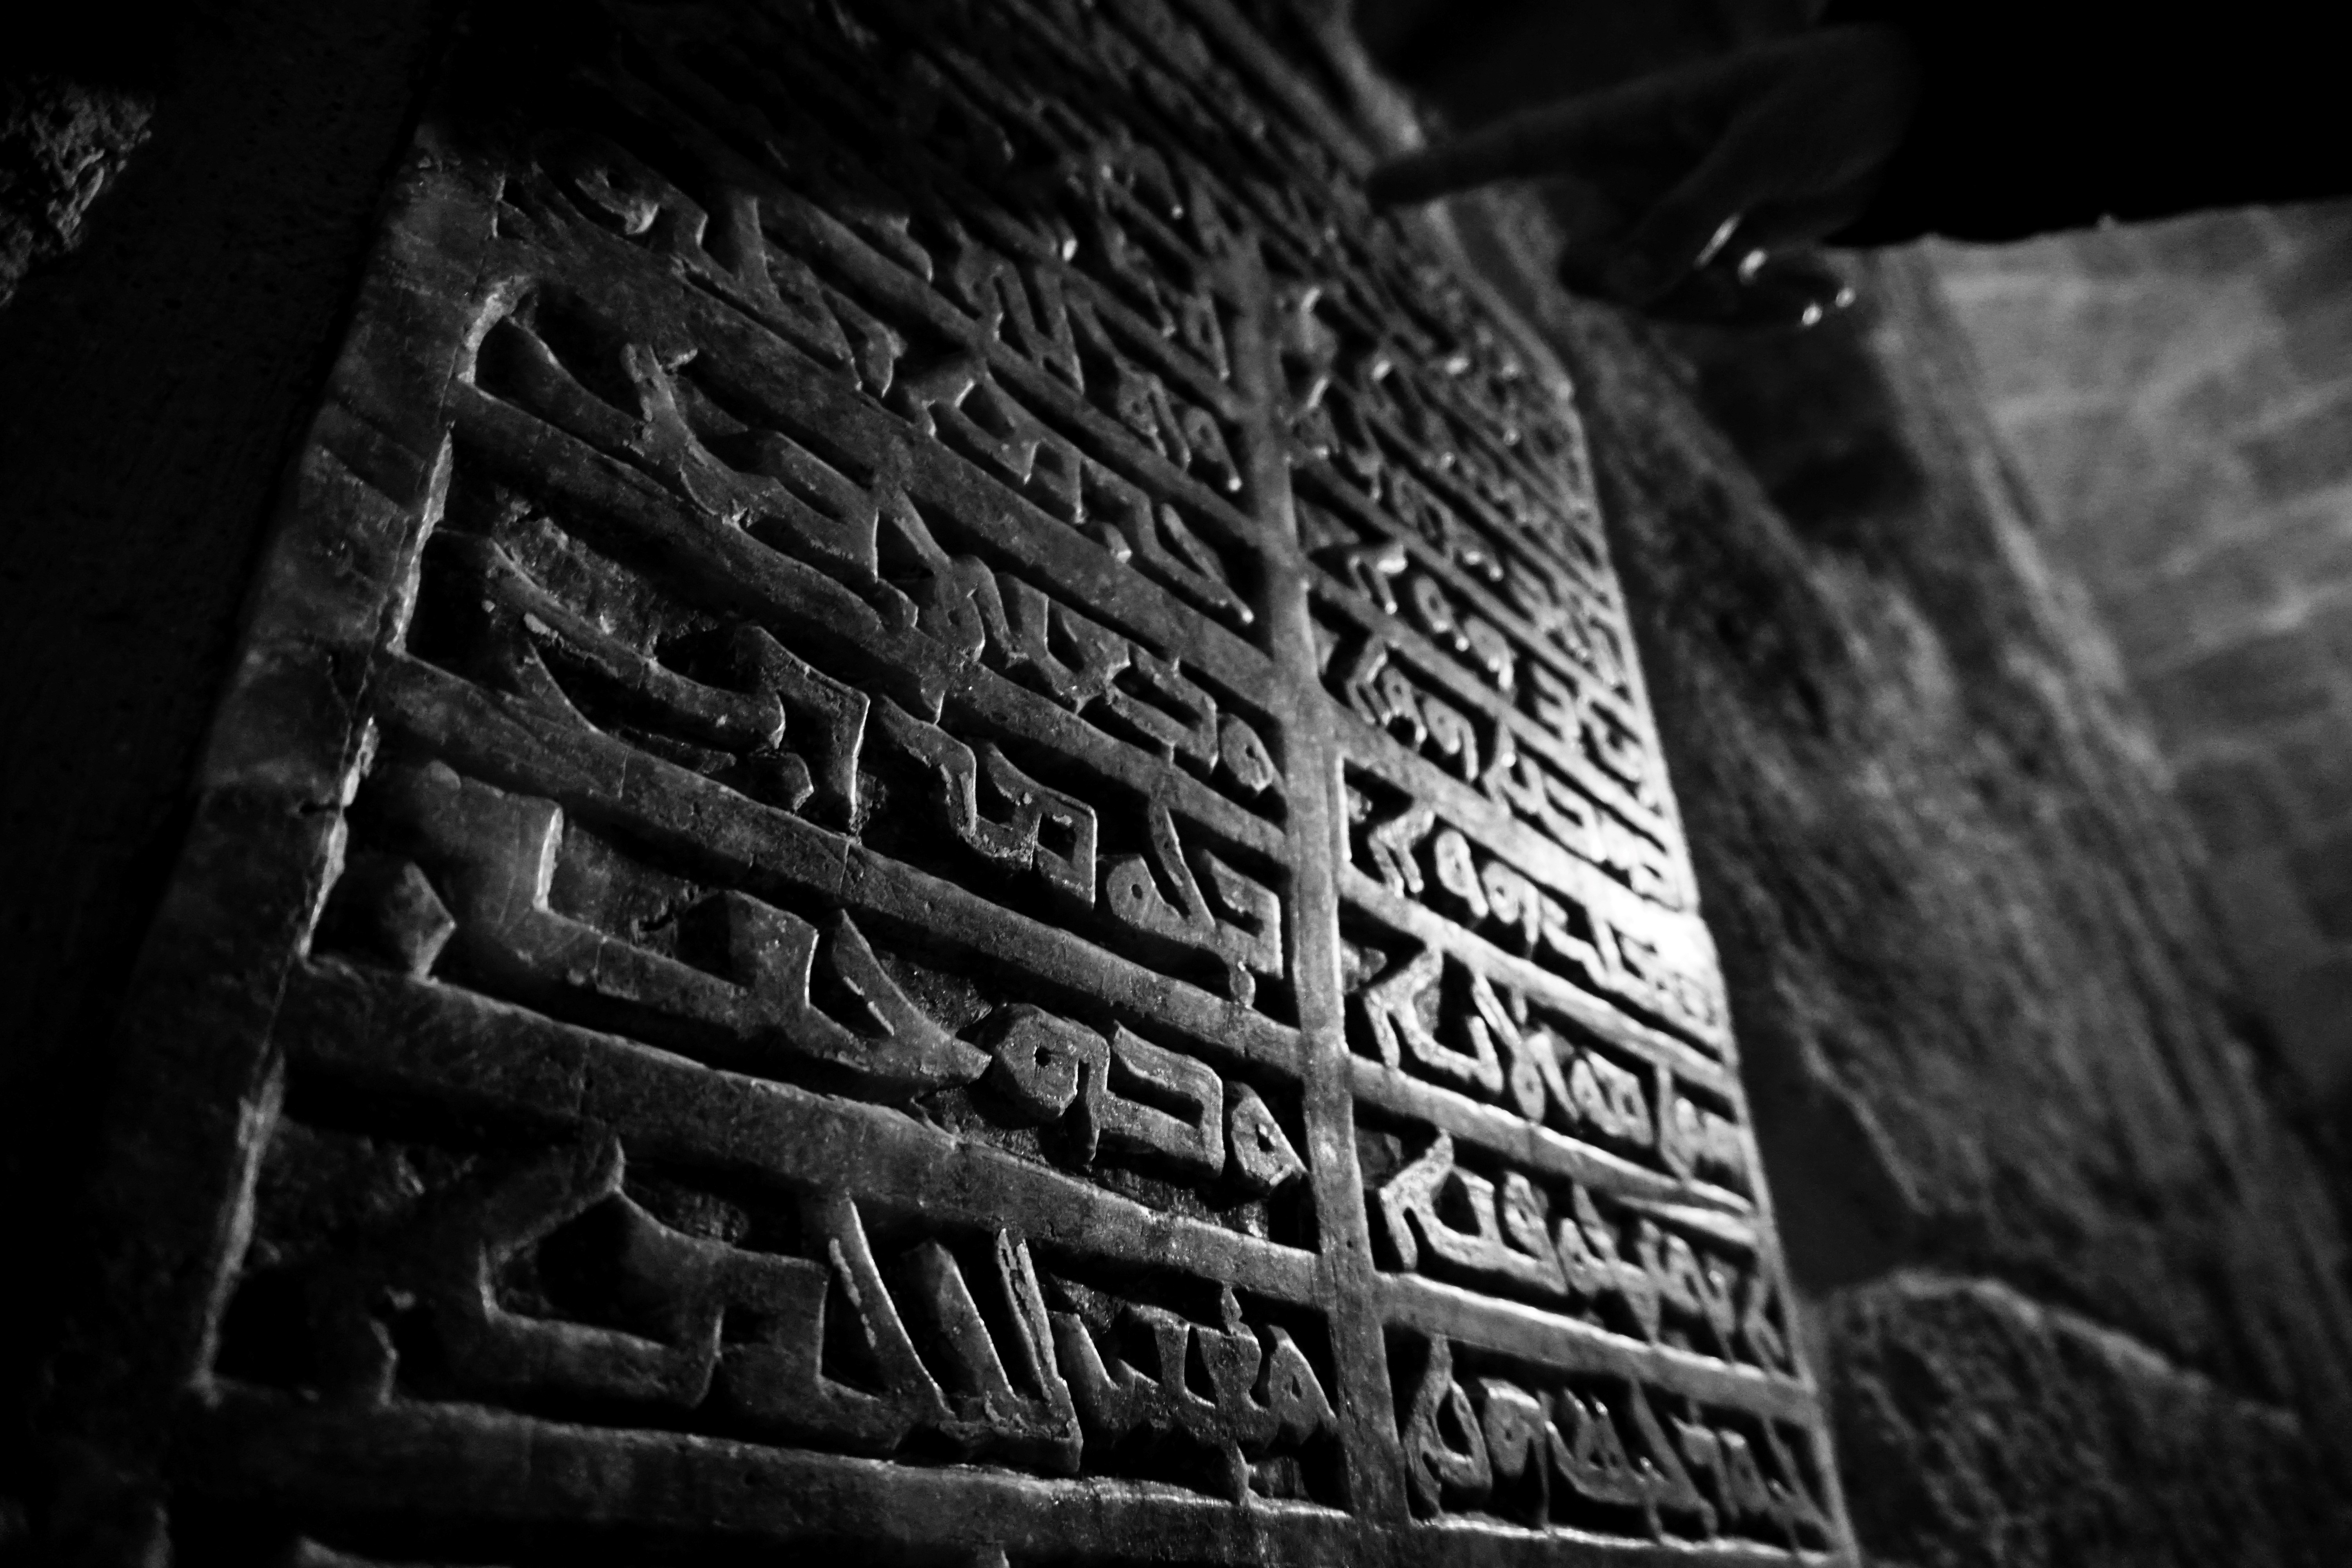  Syriac text inscribed on the door of the monastery from the 5th century